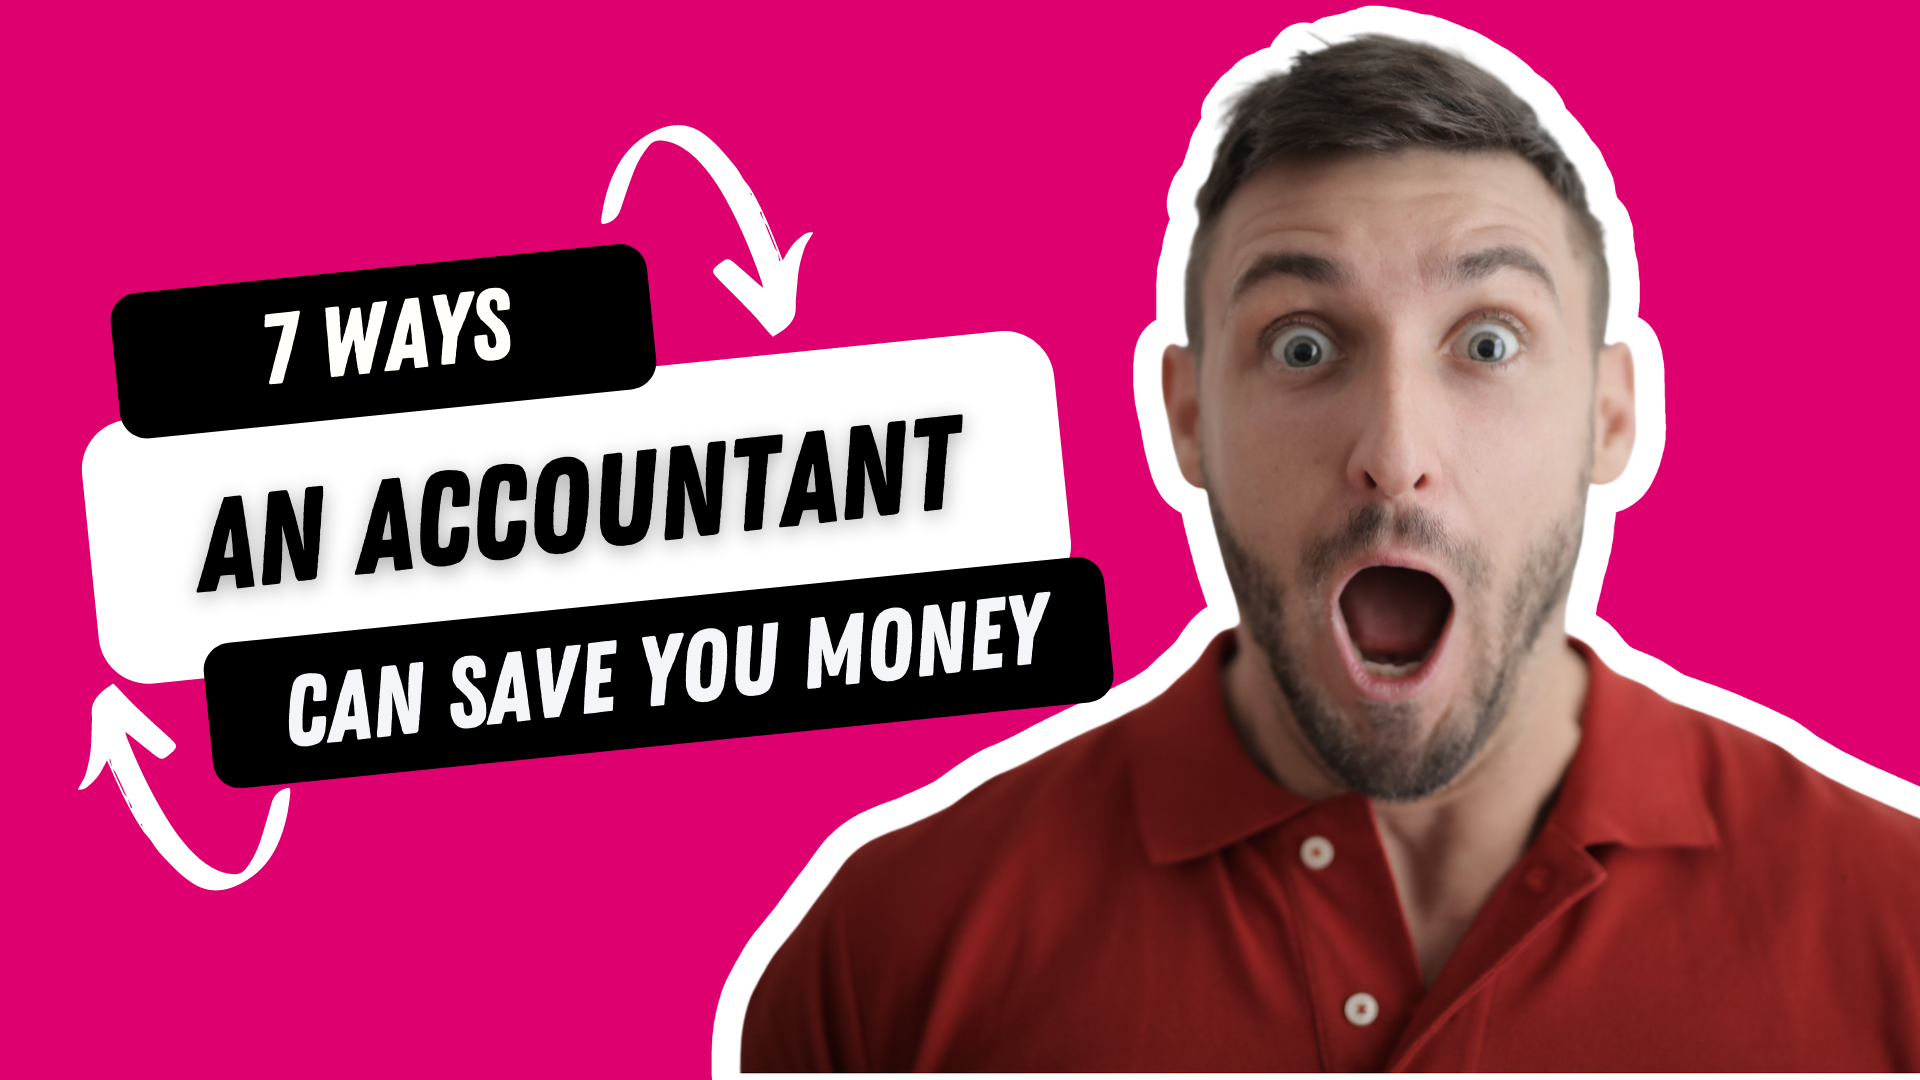 7 Ways an Accountant Can Save You Money